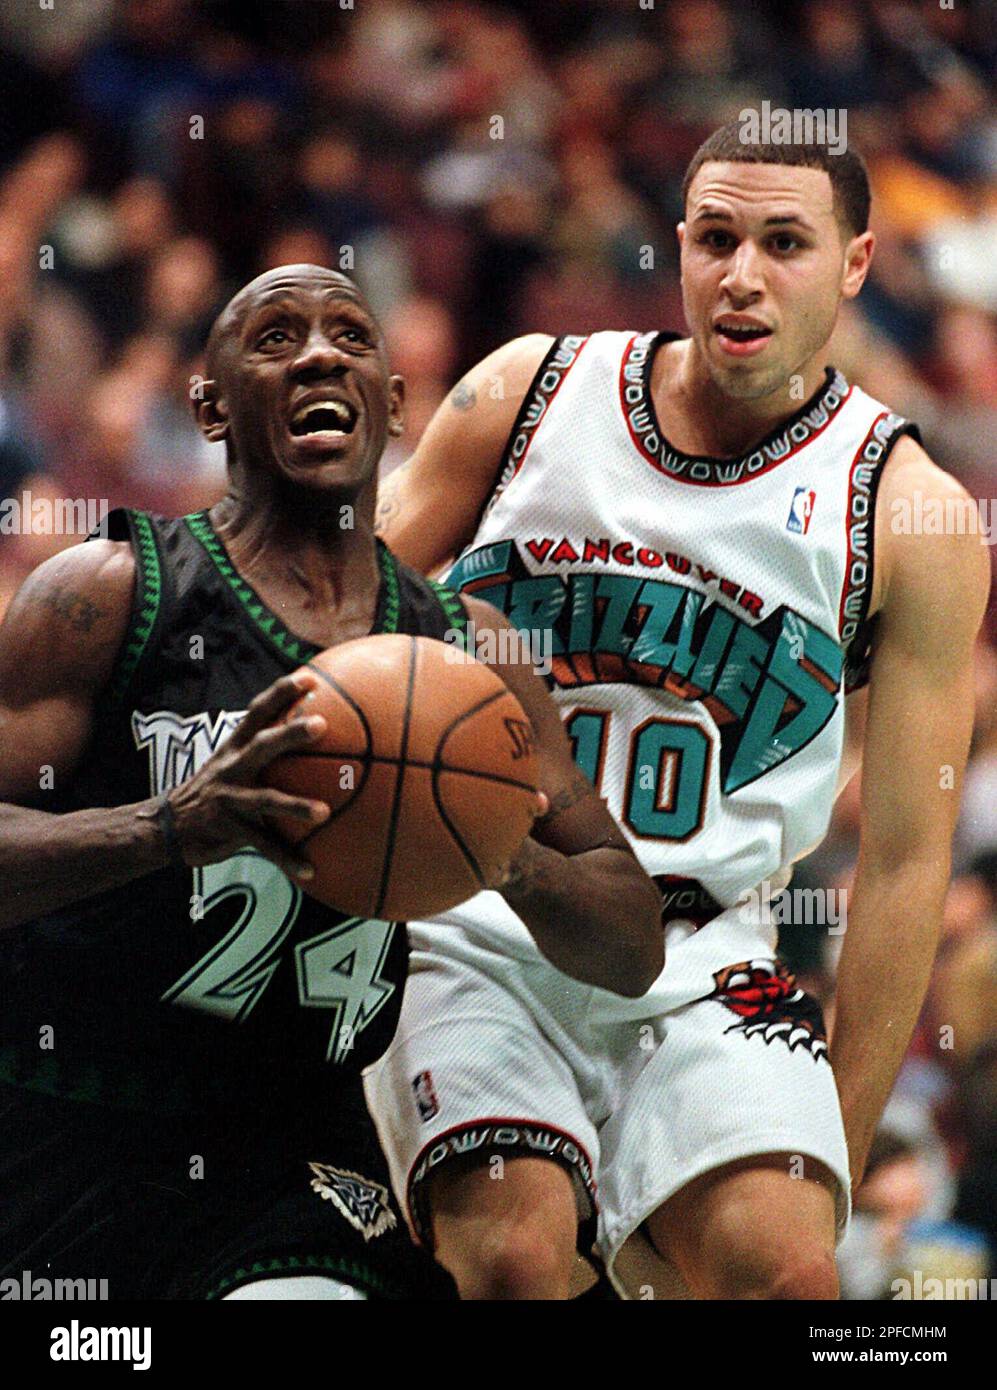 Vancouver Grizzlies guard Mike Bibby, #10, loses the ball after colliding  with Lakers guard Derek Harper on Monday, March 29, 1999 at Inglewood,  California while Harper was trying to gain possession during